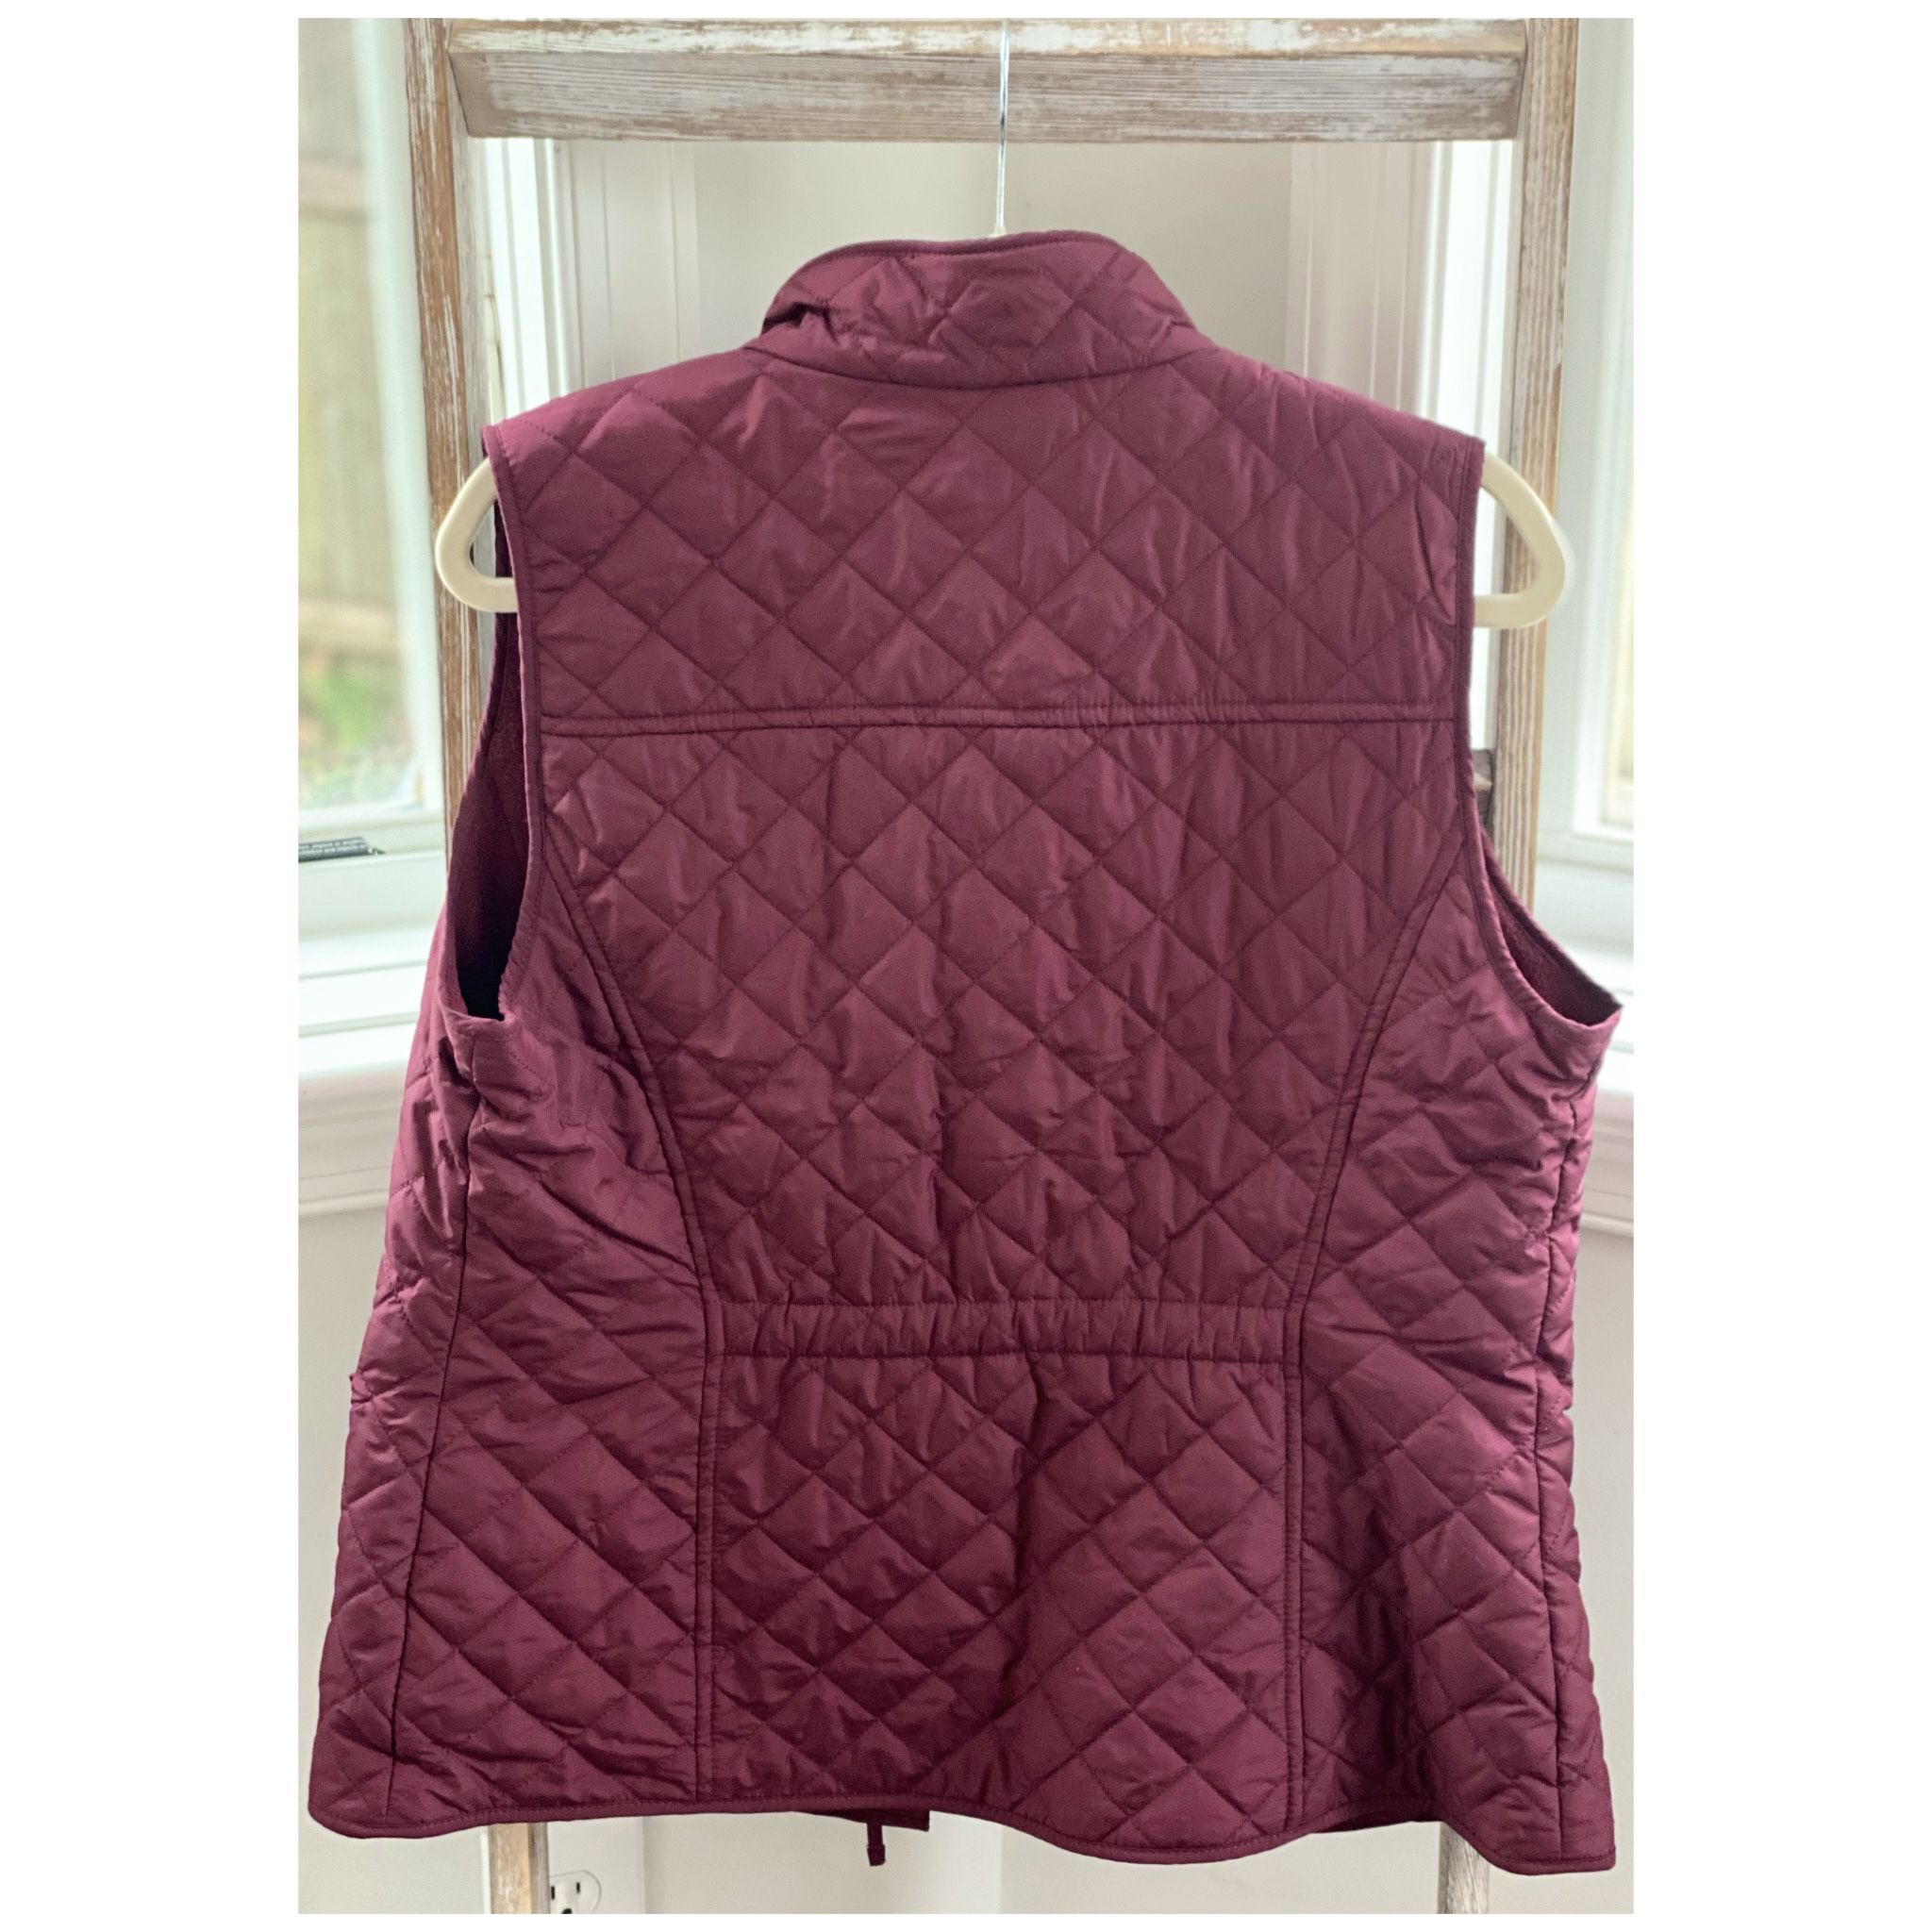 Talbots Quilted Vest Size Small